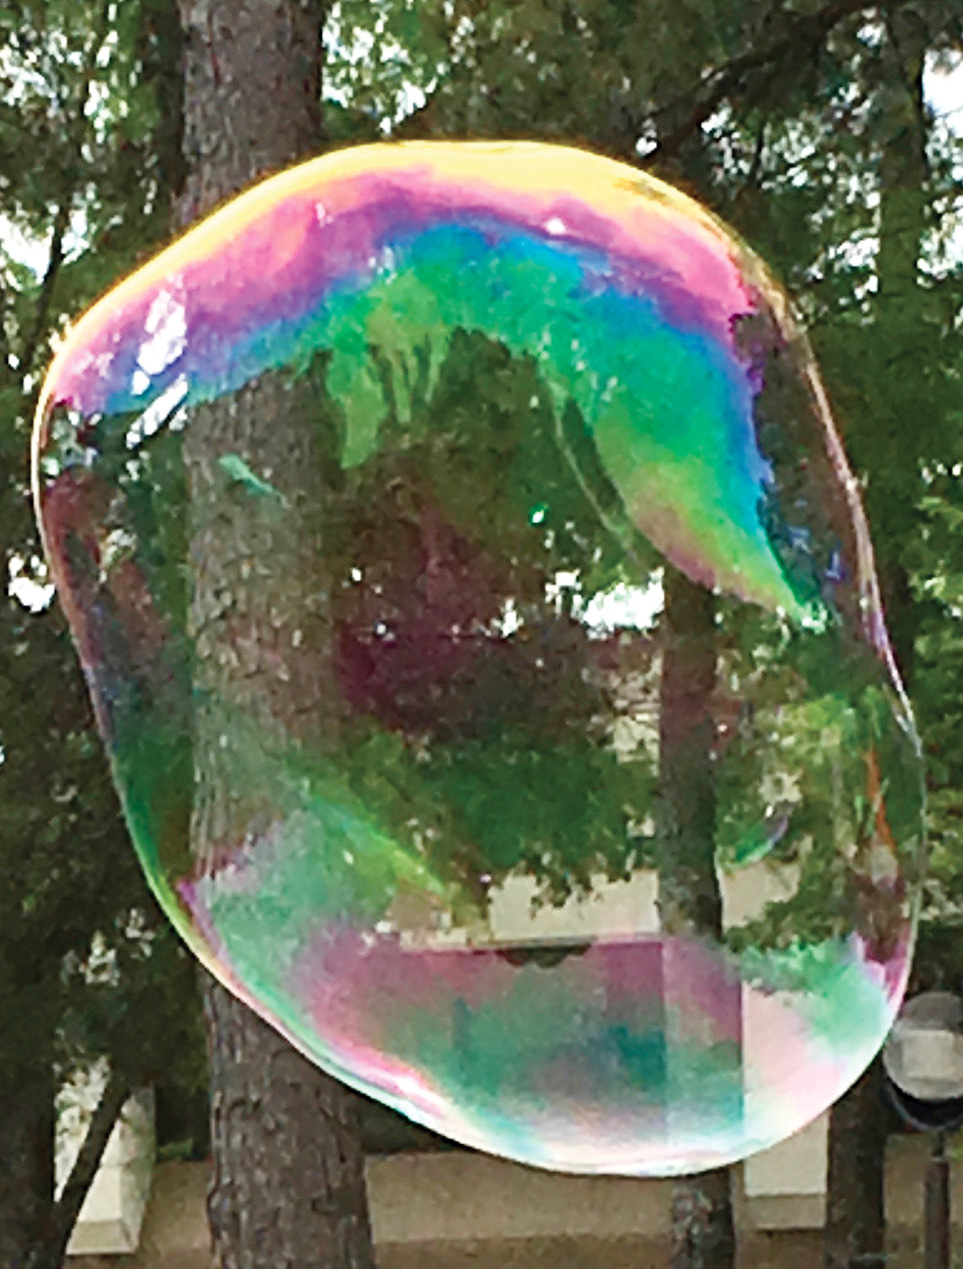 Bubbles are good examples of iridescence as the bubble solution acts as a thin film. When the soap film thickness changes or when the angle of light changes, different colors get cancelled or intensified, and the colors seem to swirl.